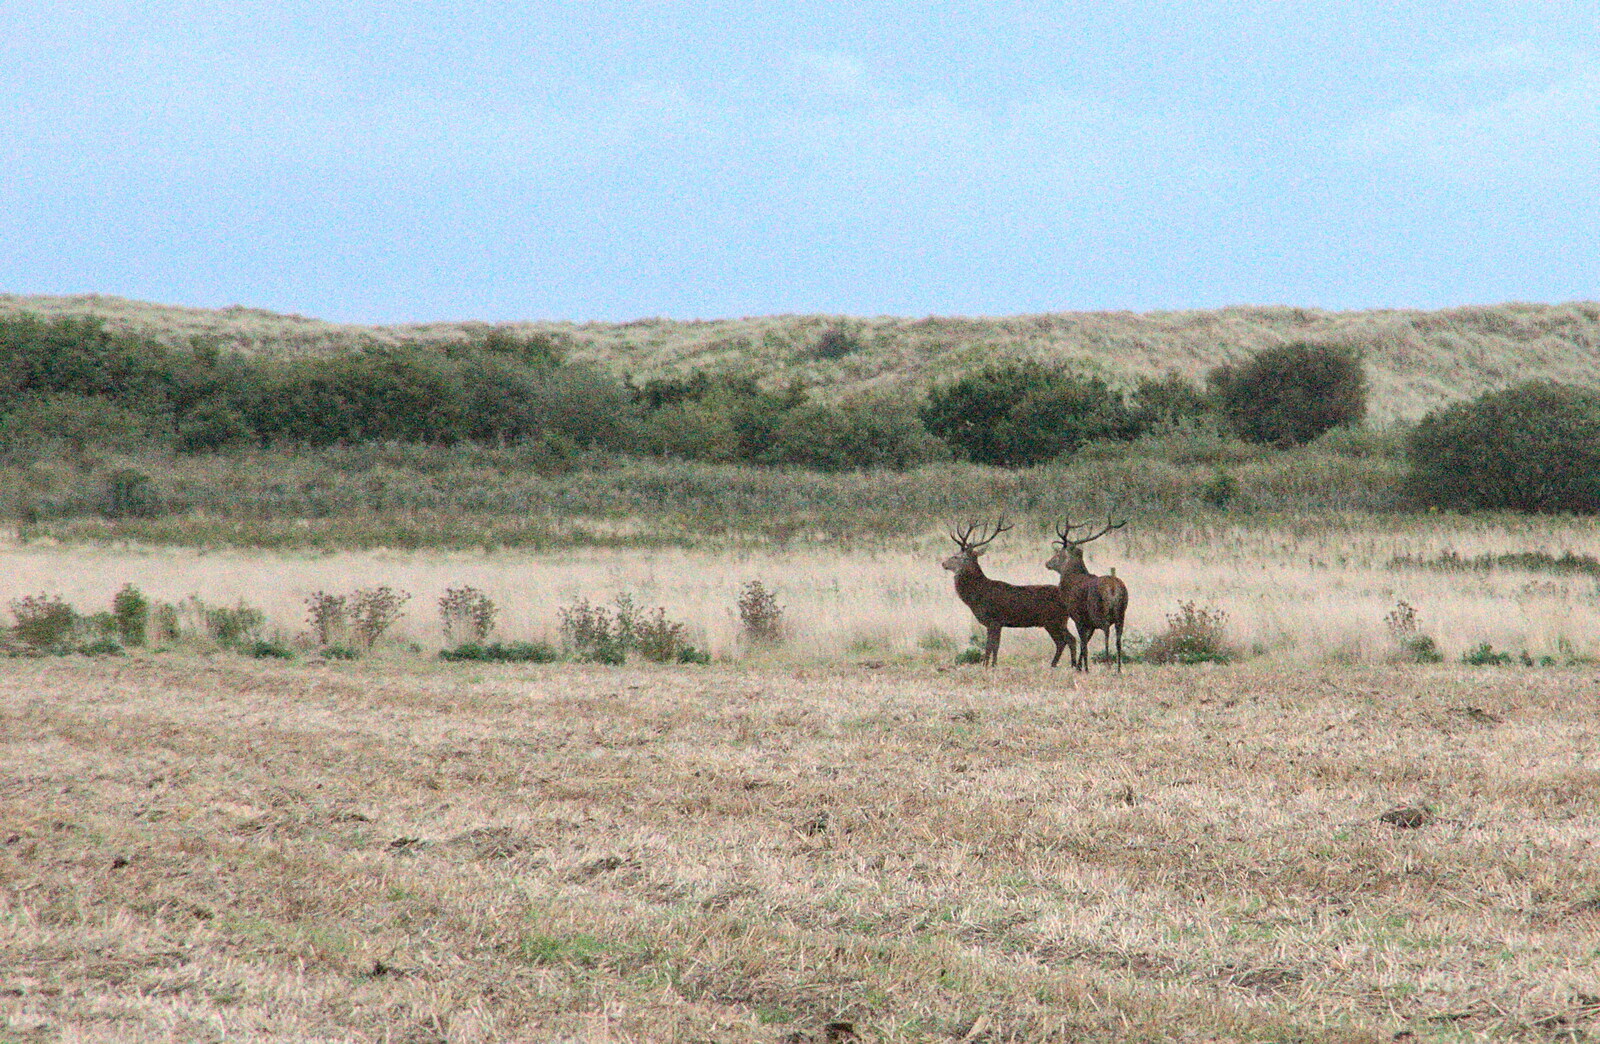 A couple of stags from An Optimistic Camping Weekend, Waxham Sands, Norfolk - 22nd September 2018